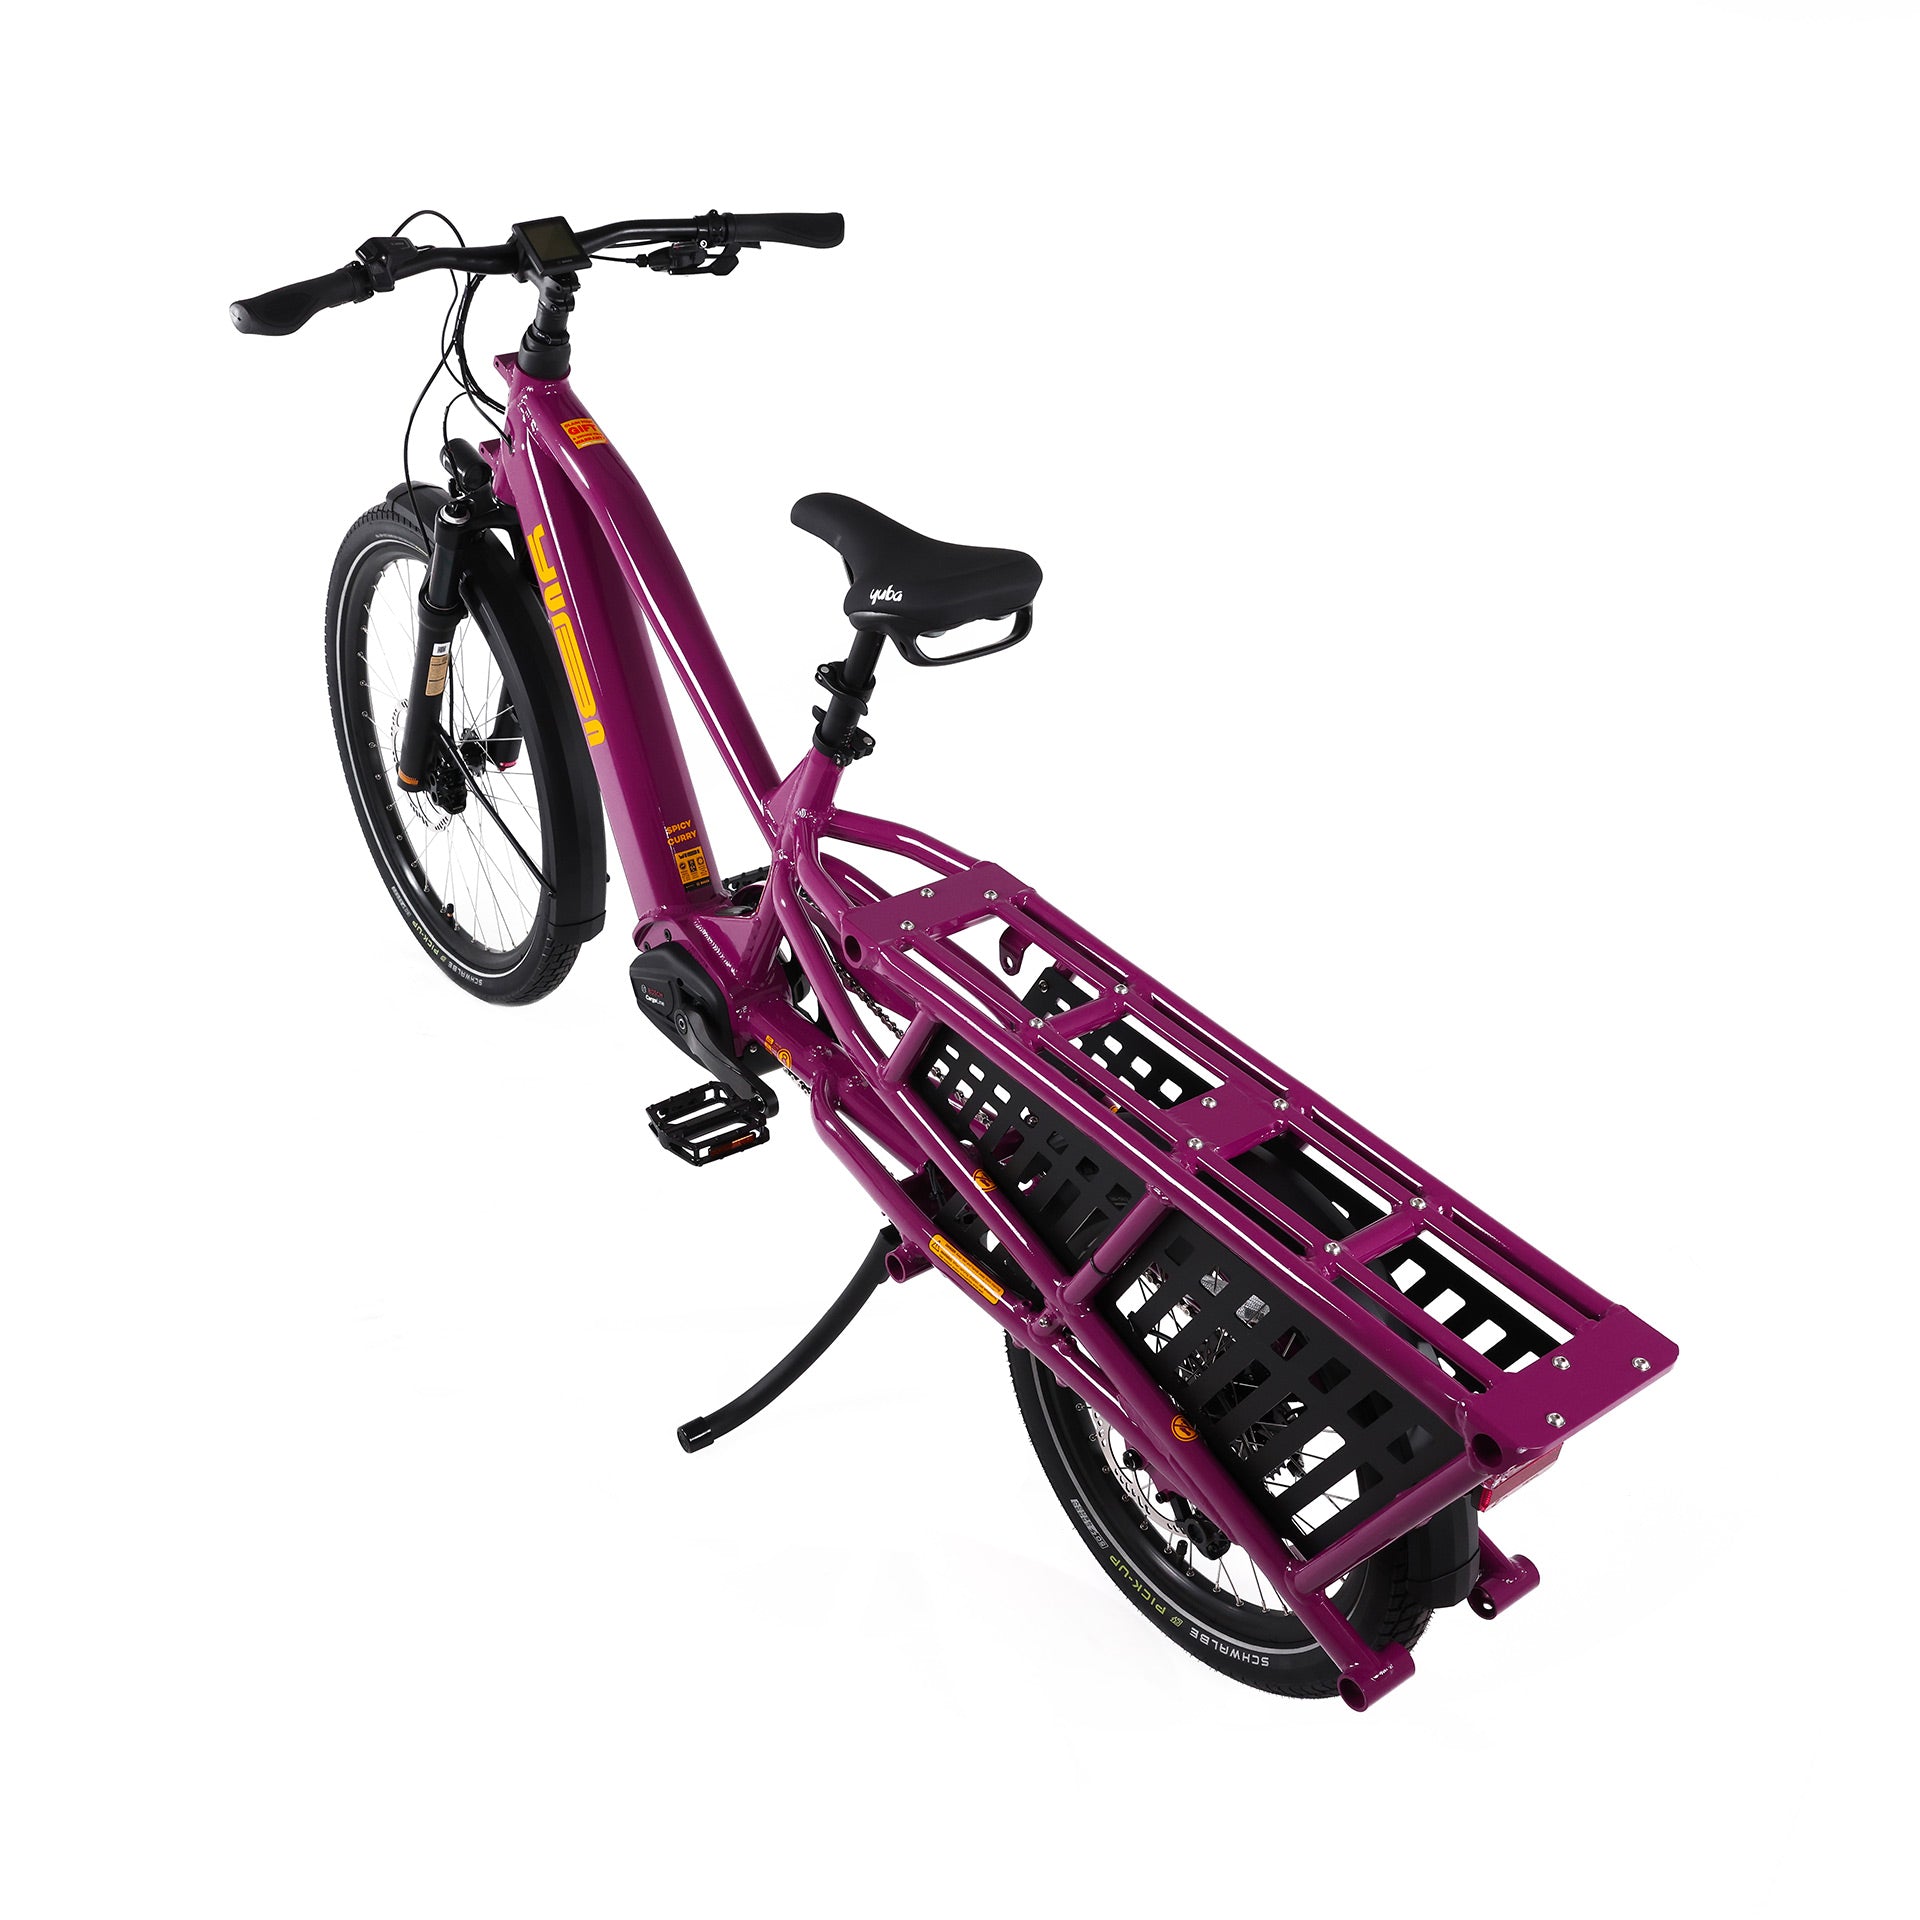 A product image of the Yuba Spicy Curry V4 electric longtail cargo bike taken from an overhead angle. The frame colour is Very Berry (a red grape colour) and the bike is in its basic set up, with no accessories attached. 